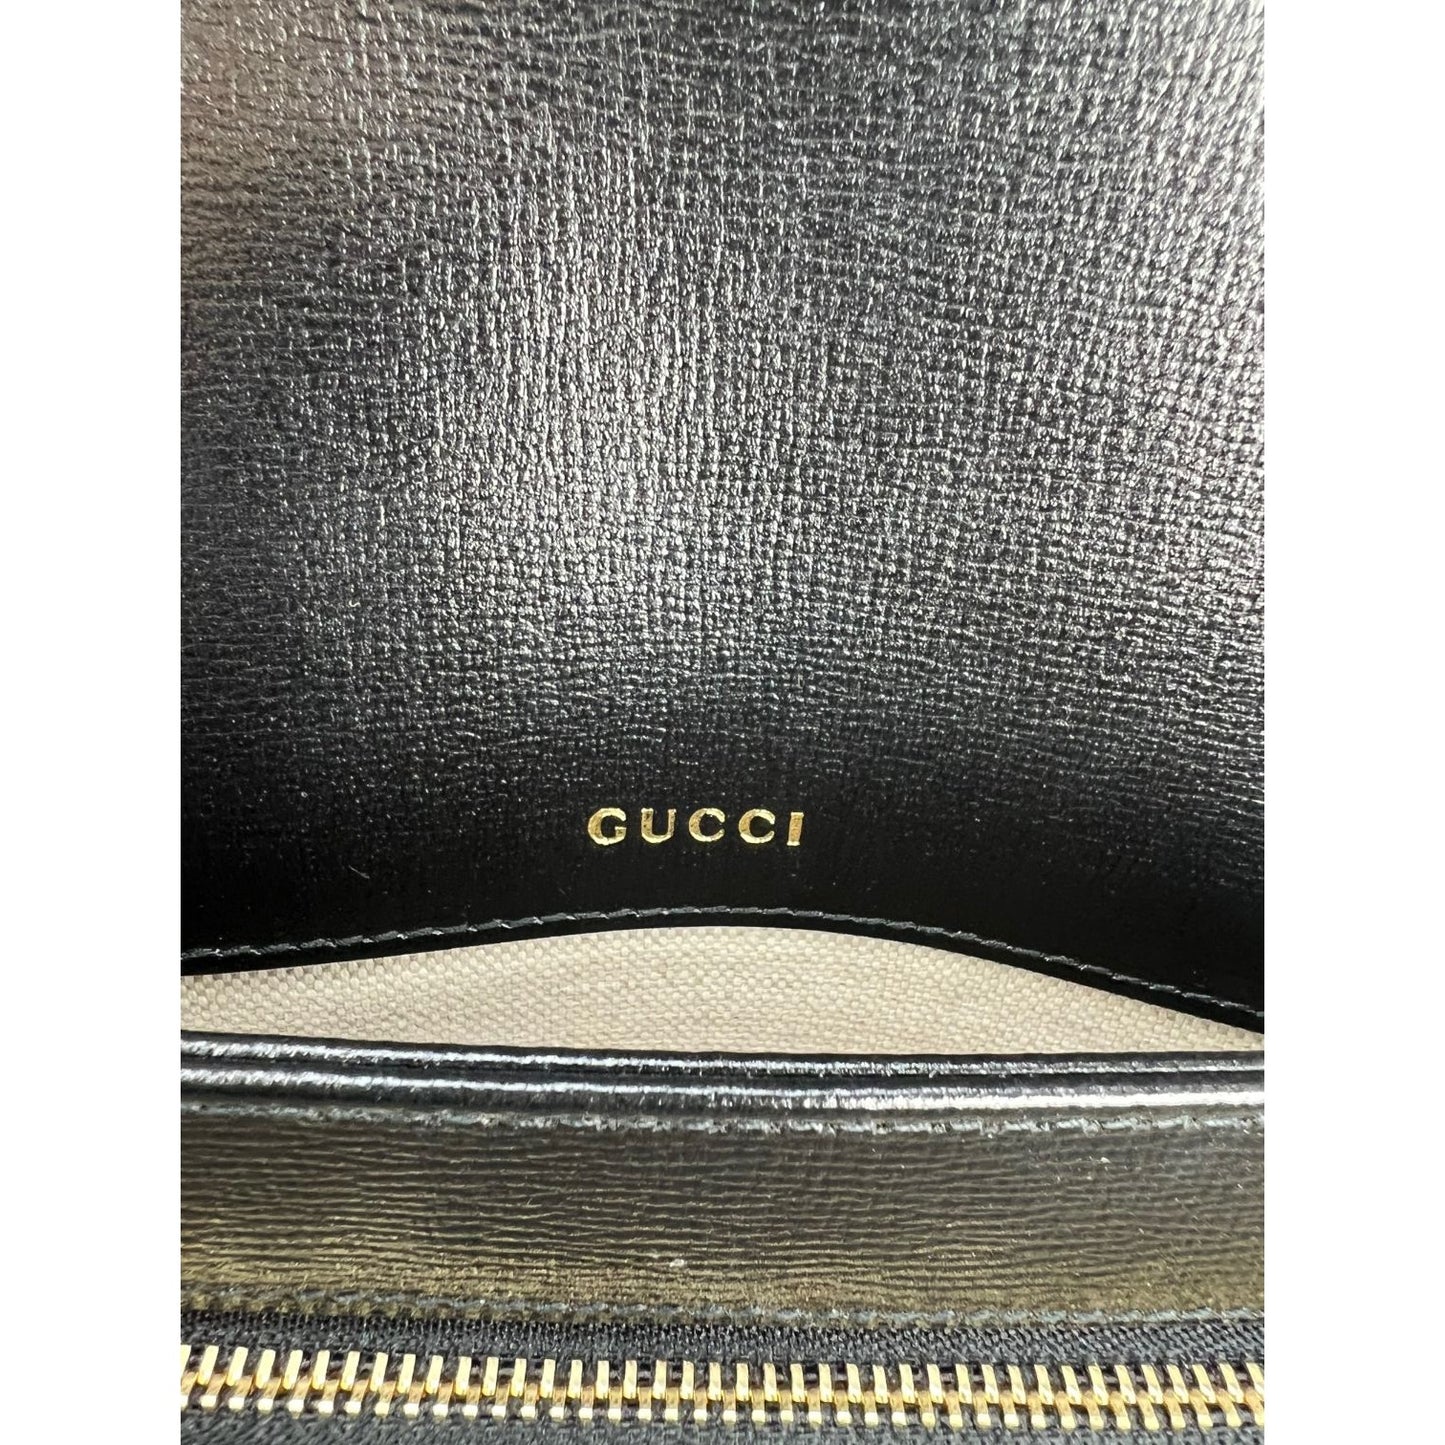 Gucci - Authenticated Horsebit 1955 Wallet - Leather Brown Striped for Women, Very Good Condition